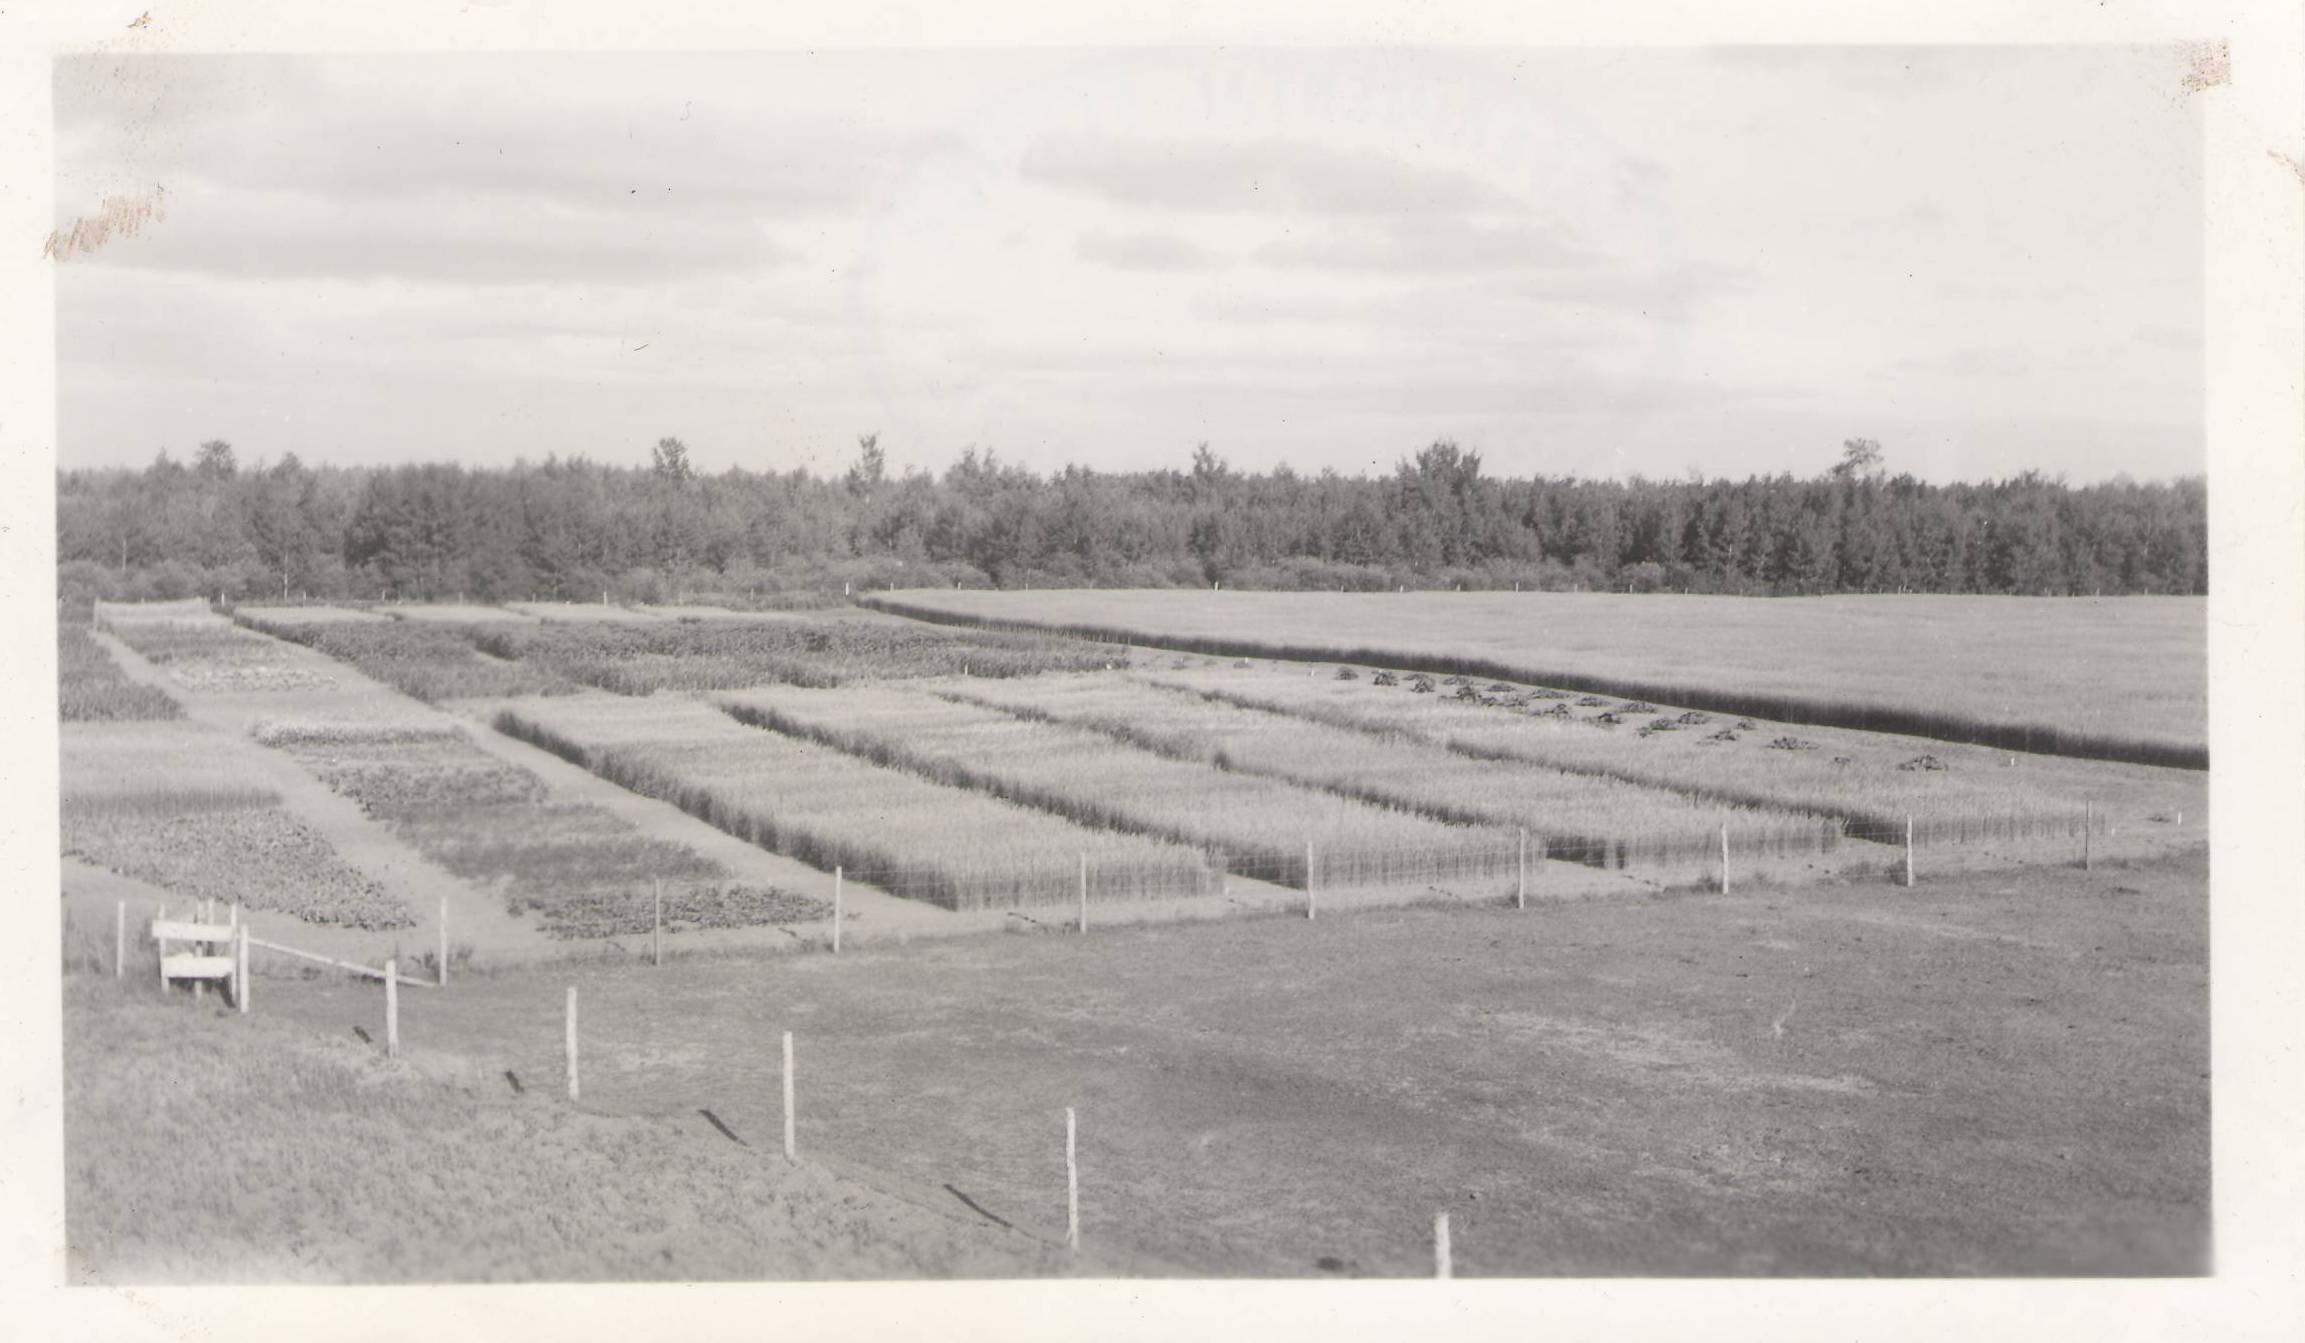 Plots at the Fort Vermilion Experimental Farm.
1993.04.31.06 / Agriculture Canada 

